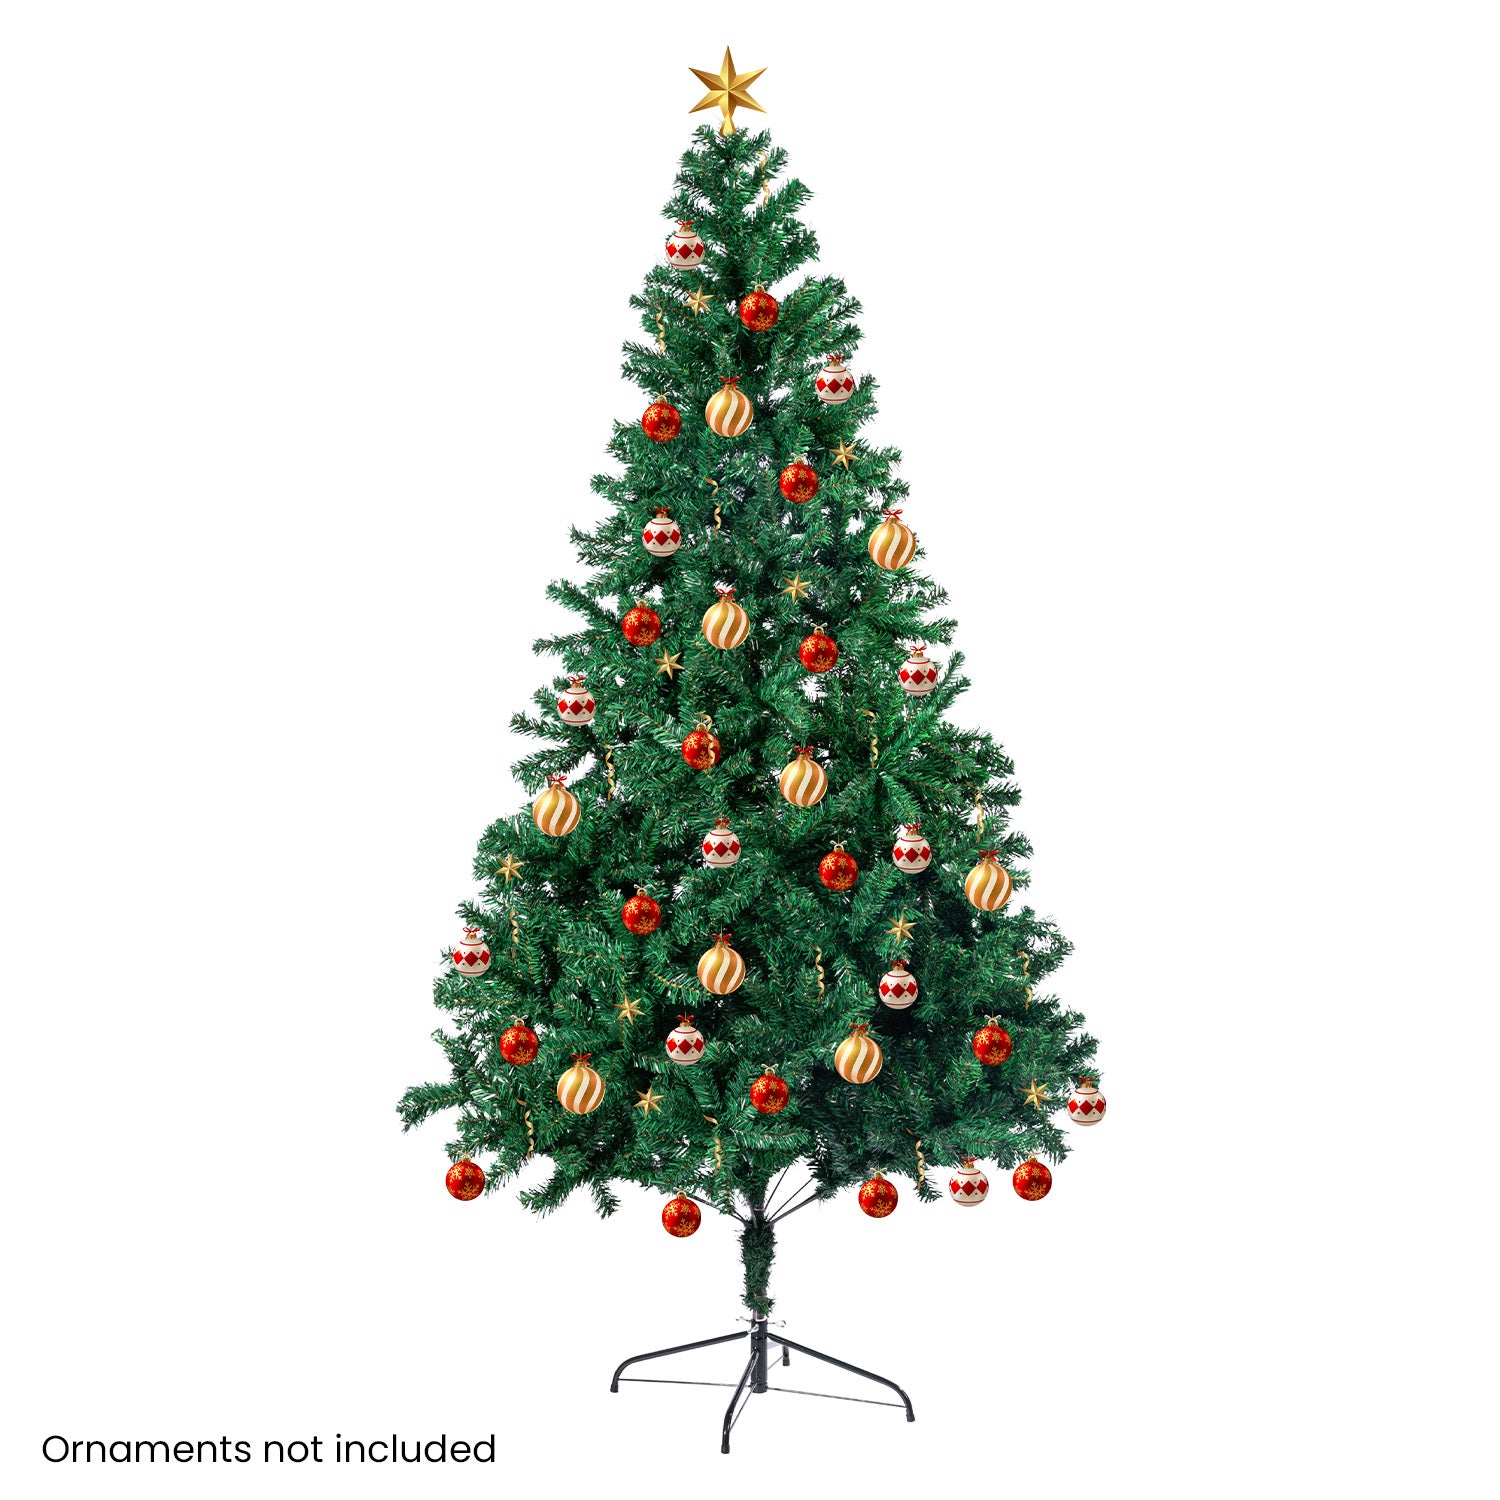 Christabelle Green Christmas Tree 1.8m Xmas Decor Decorations - 850 Tips - 0